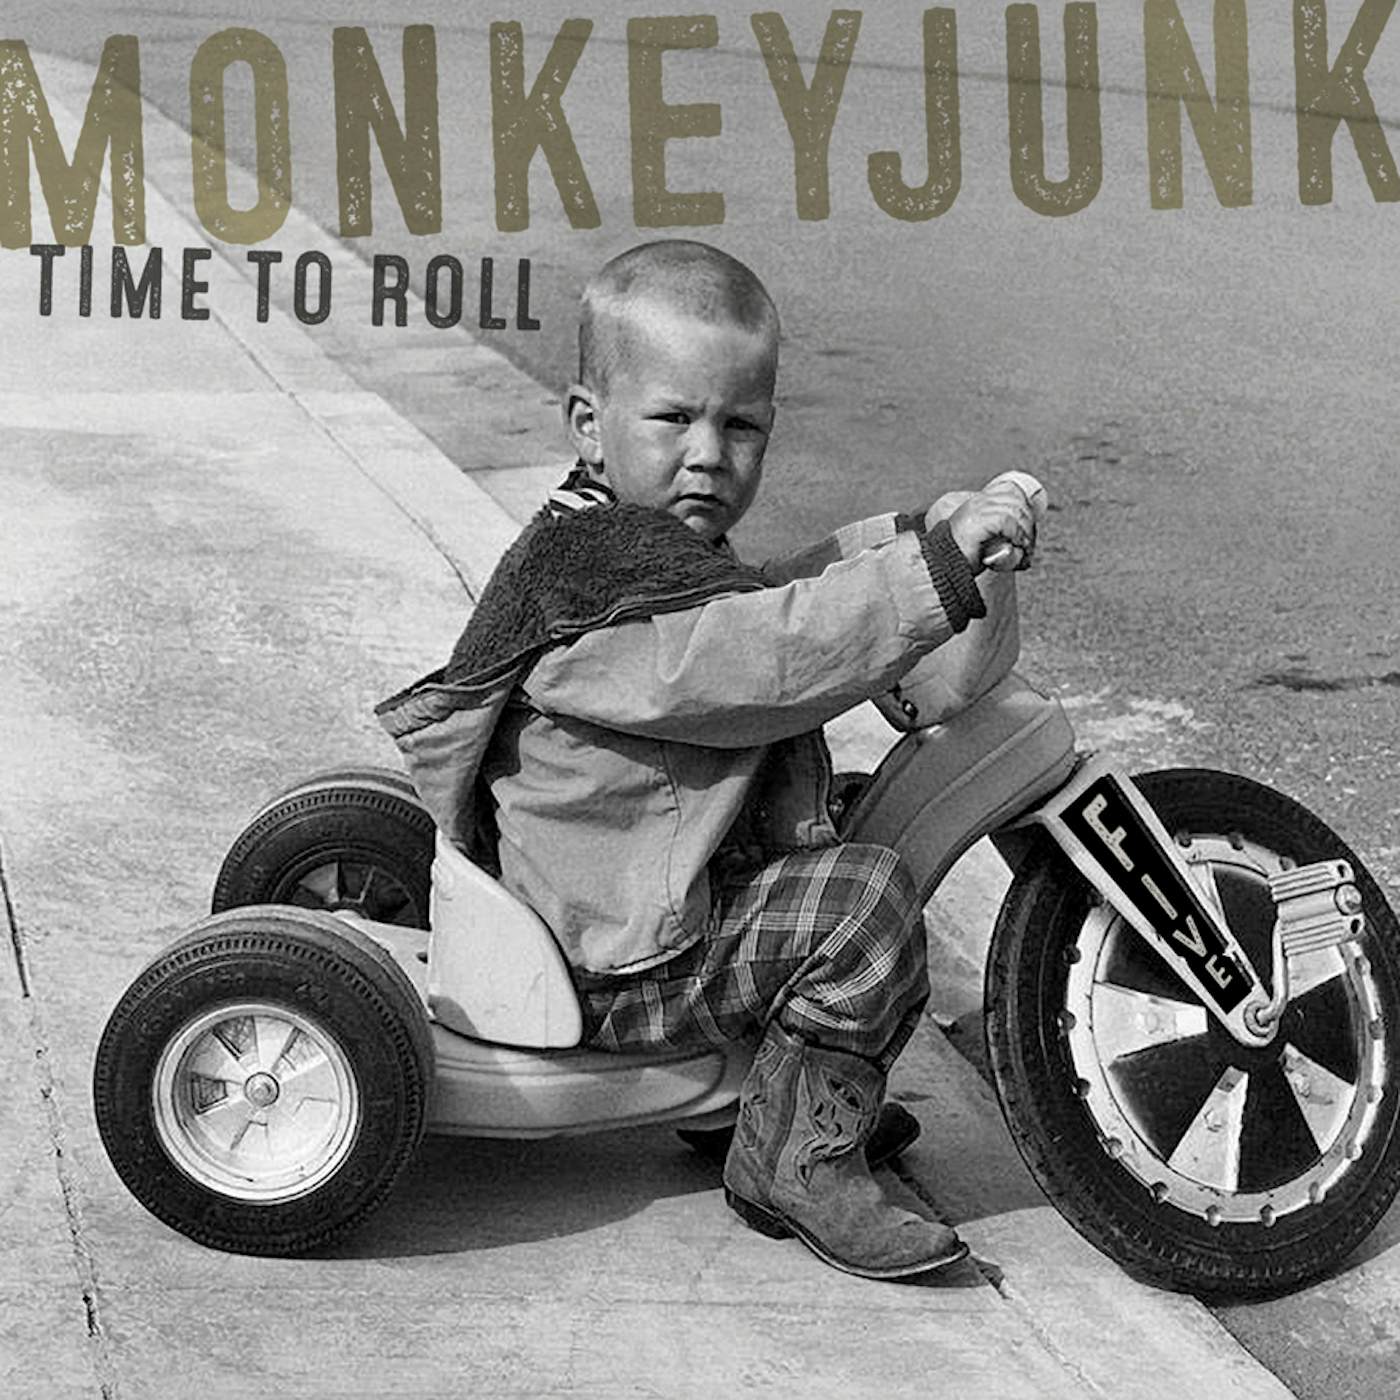 MonkeyJunk Time To Roll Vinyl Record